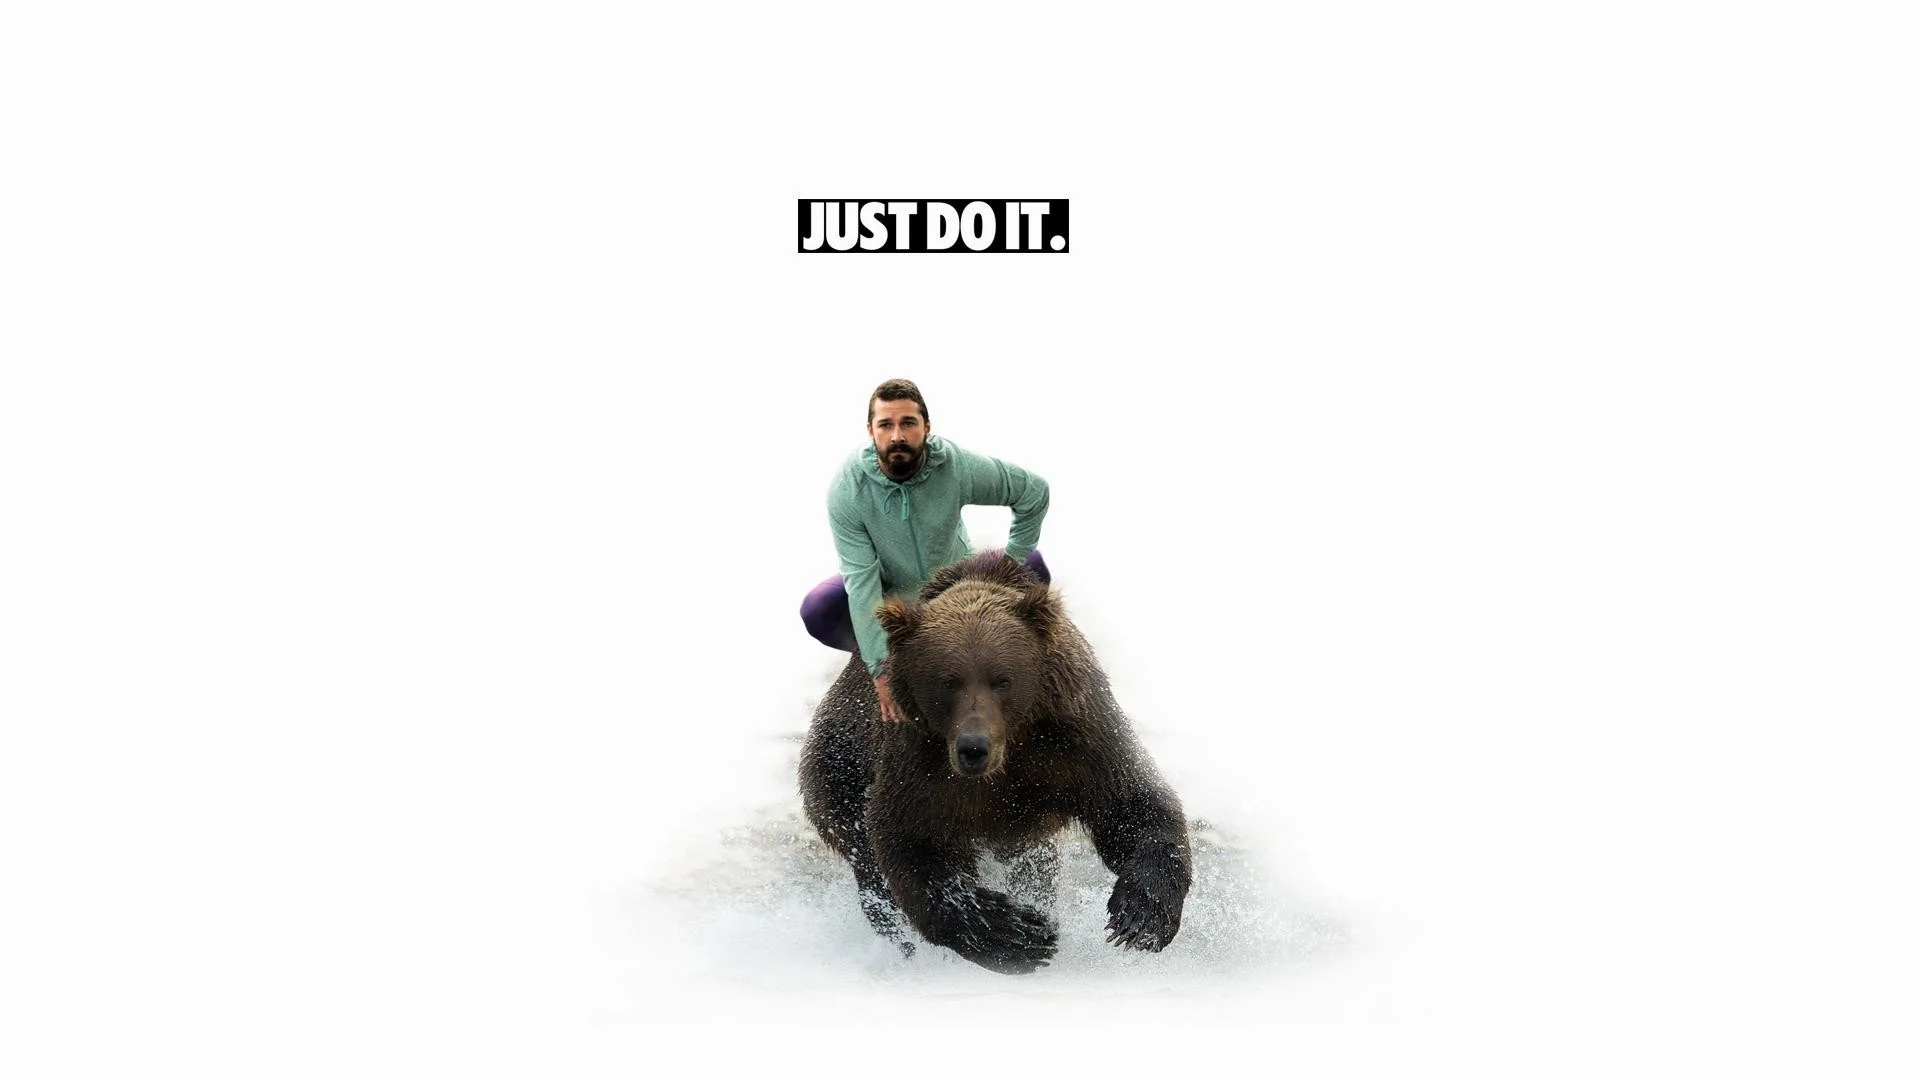 Wallpaper.wiki Shia labeouf white bear grizzly bear just do it images PIC WPE0010487